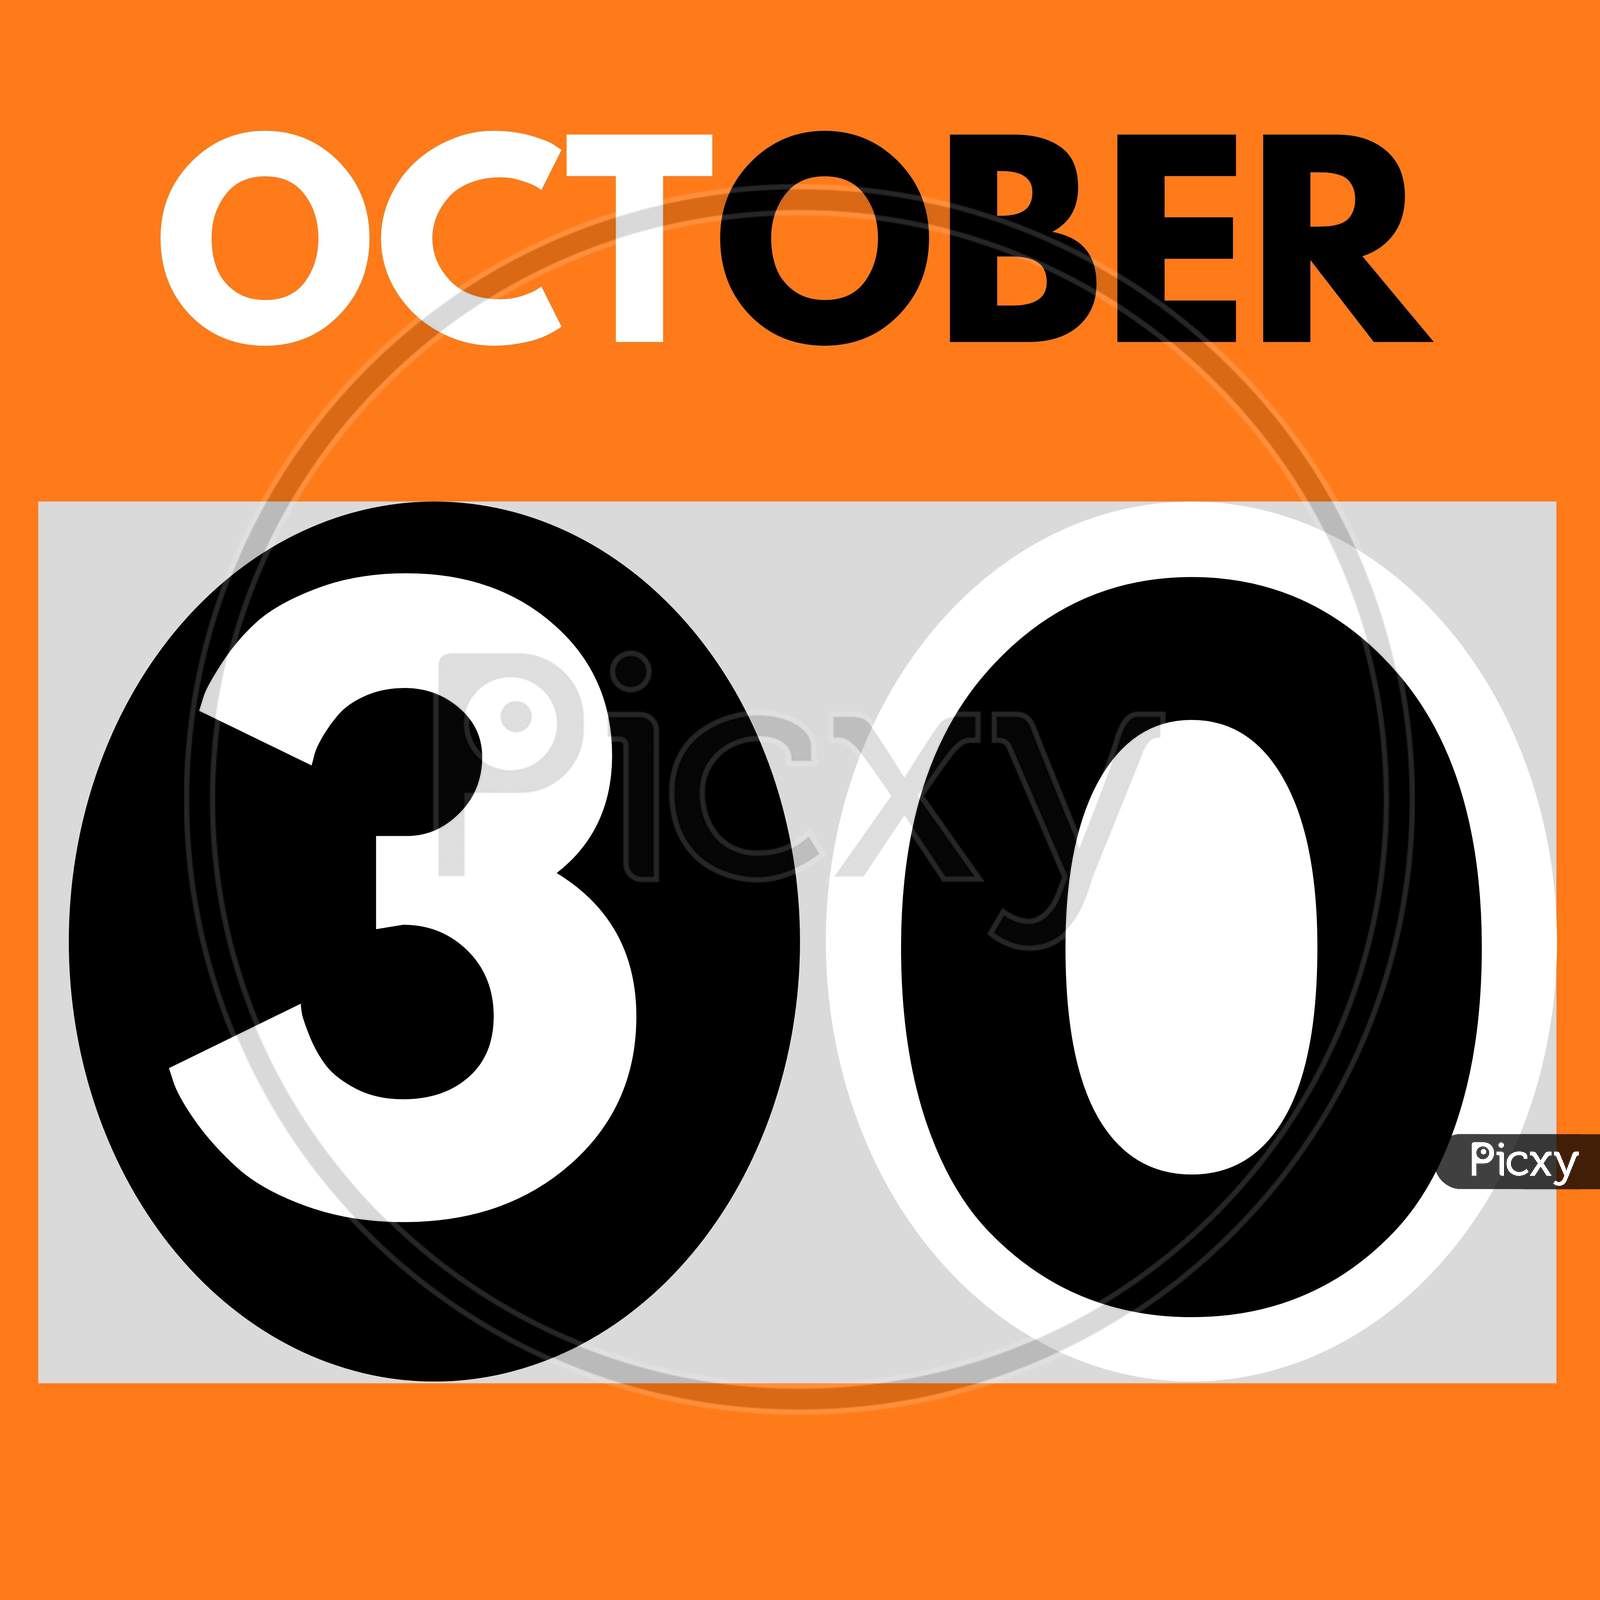 October 30 . Modern Daily Calendar Icon .Date ,Day, Month .Calendar For The Month Of October